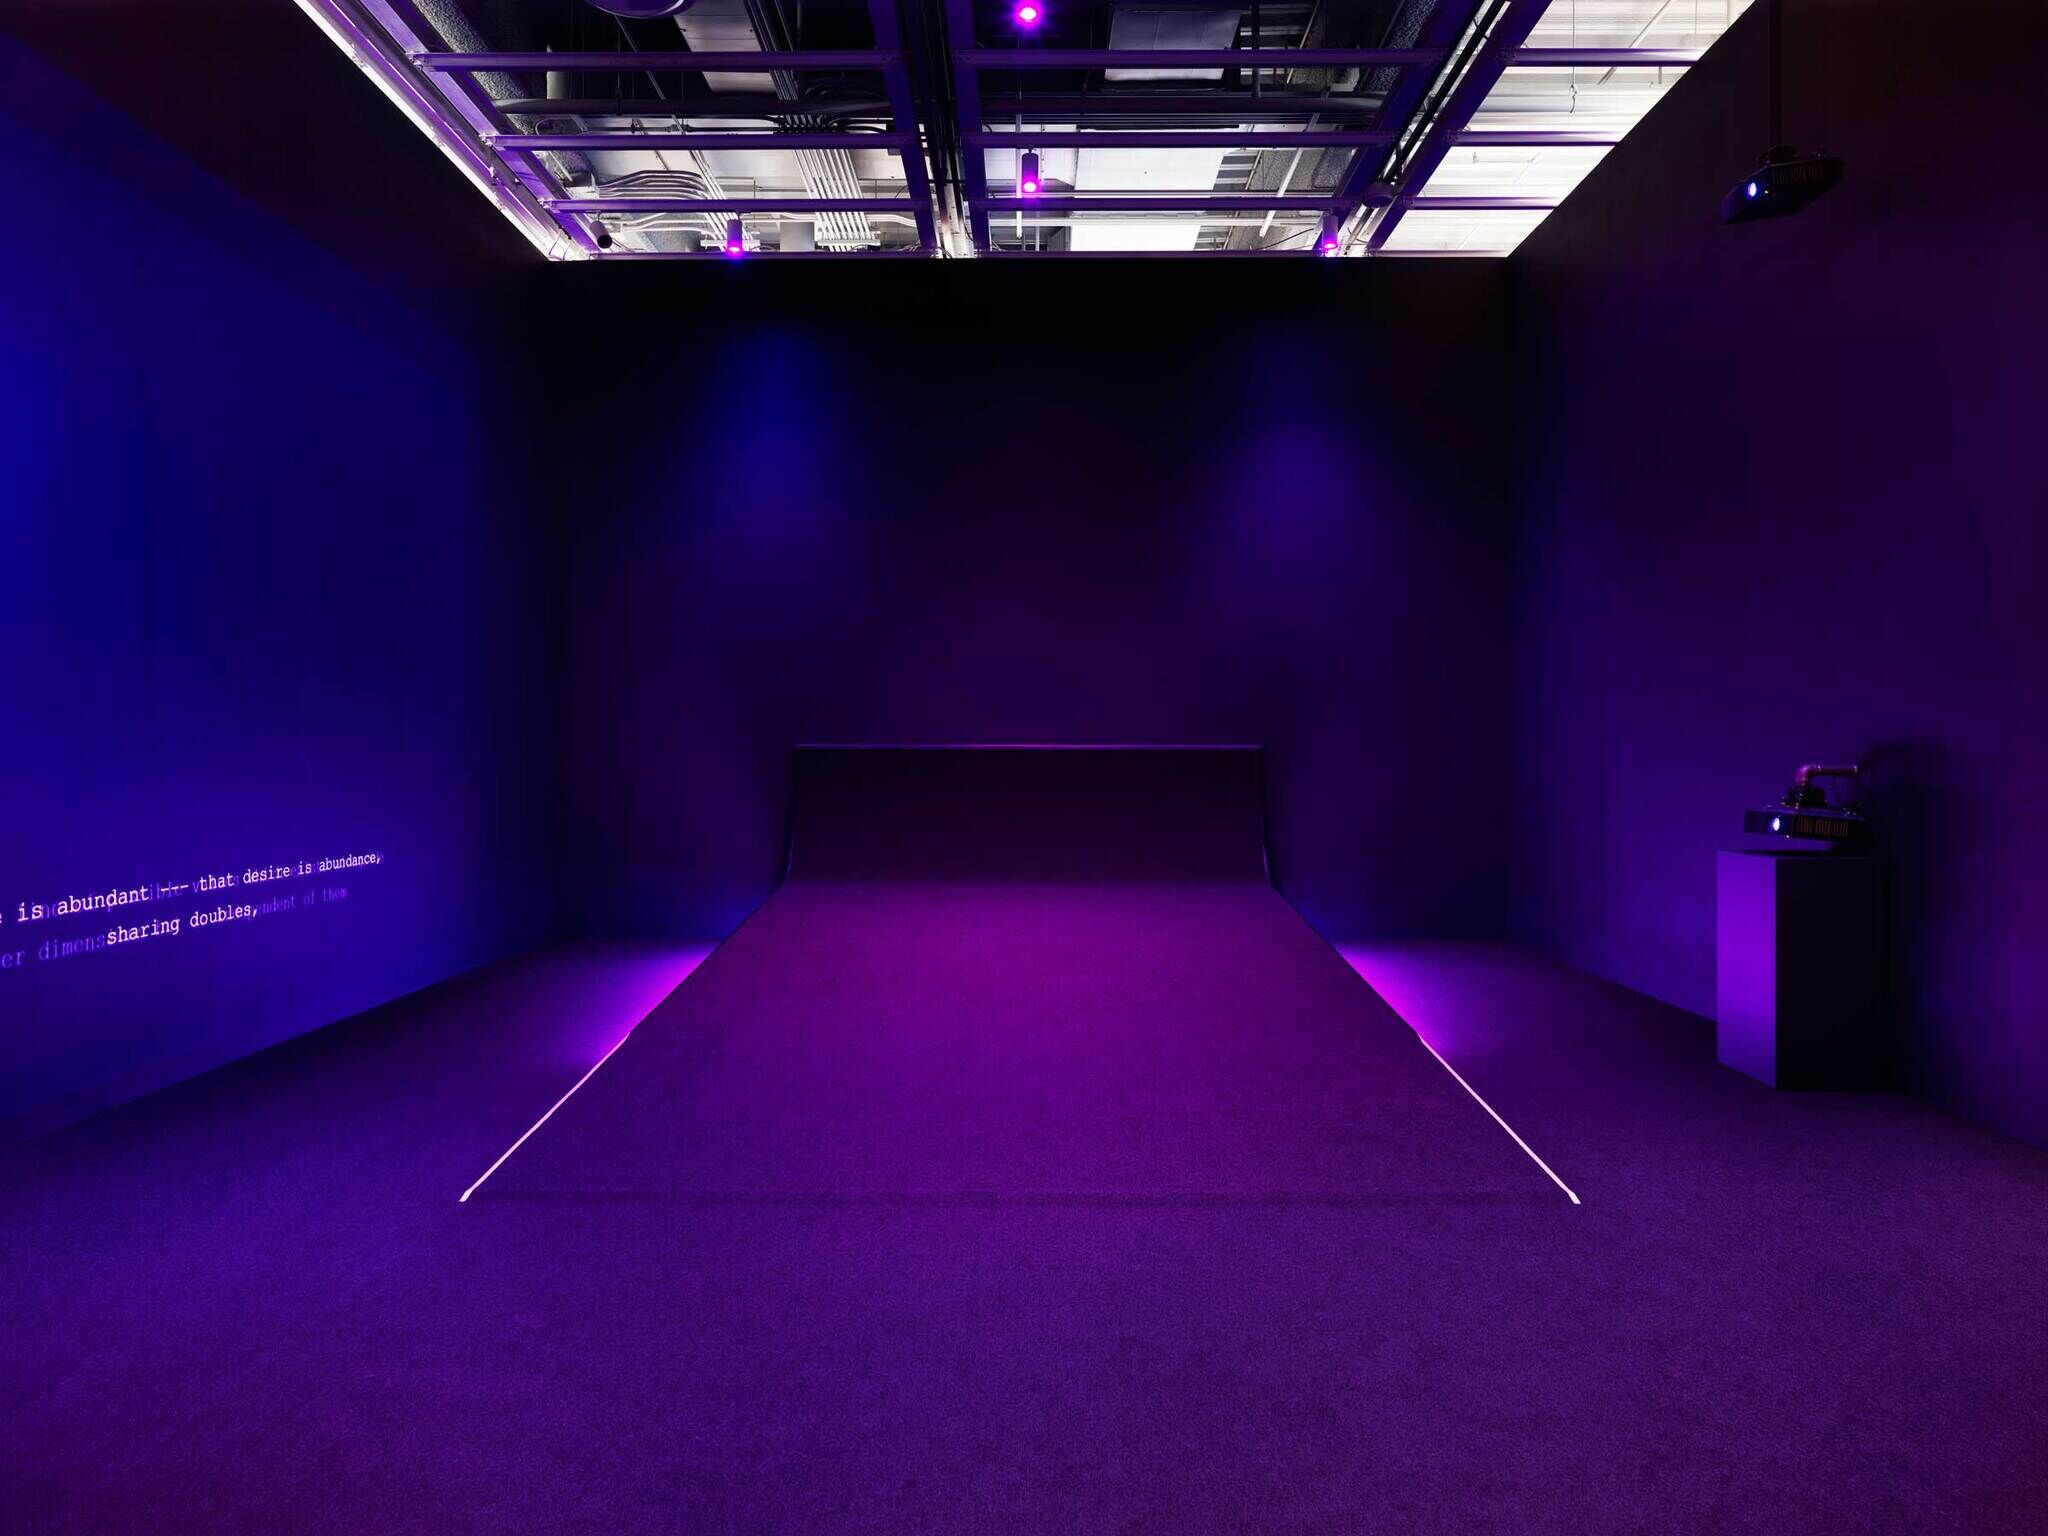 A dimly lit room with purple lighting, featuring a minimalist art installation with a neon line on the floor.